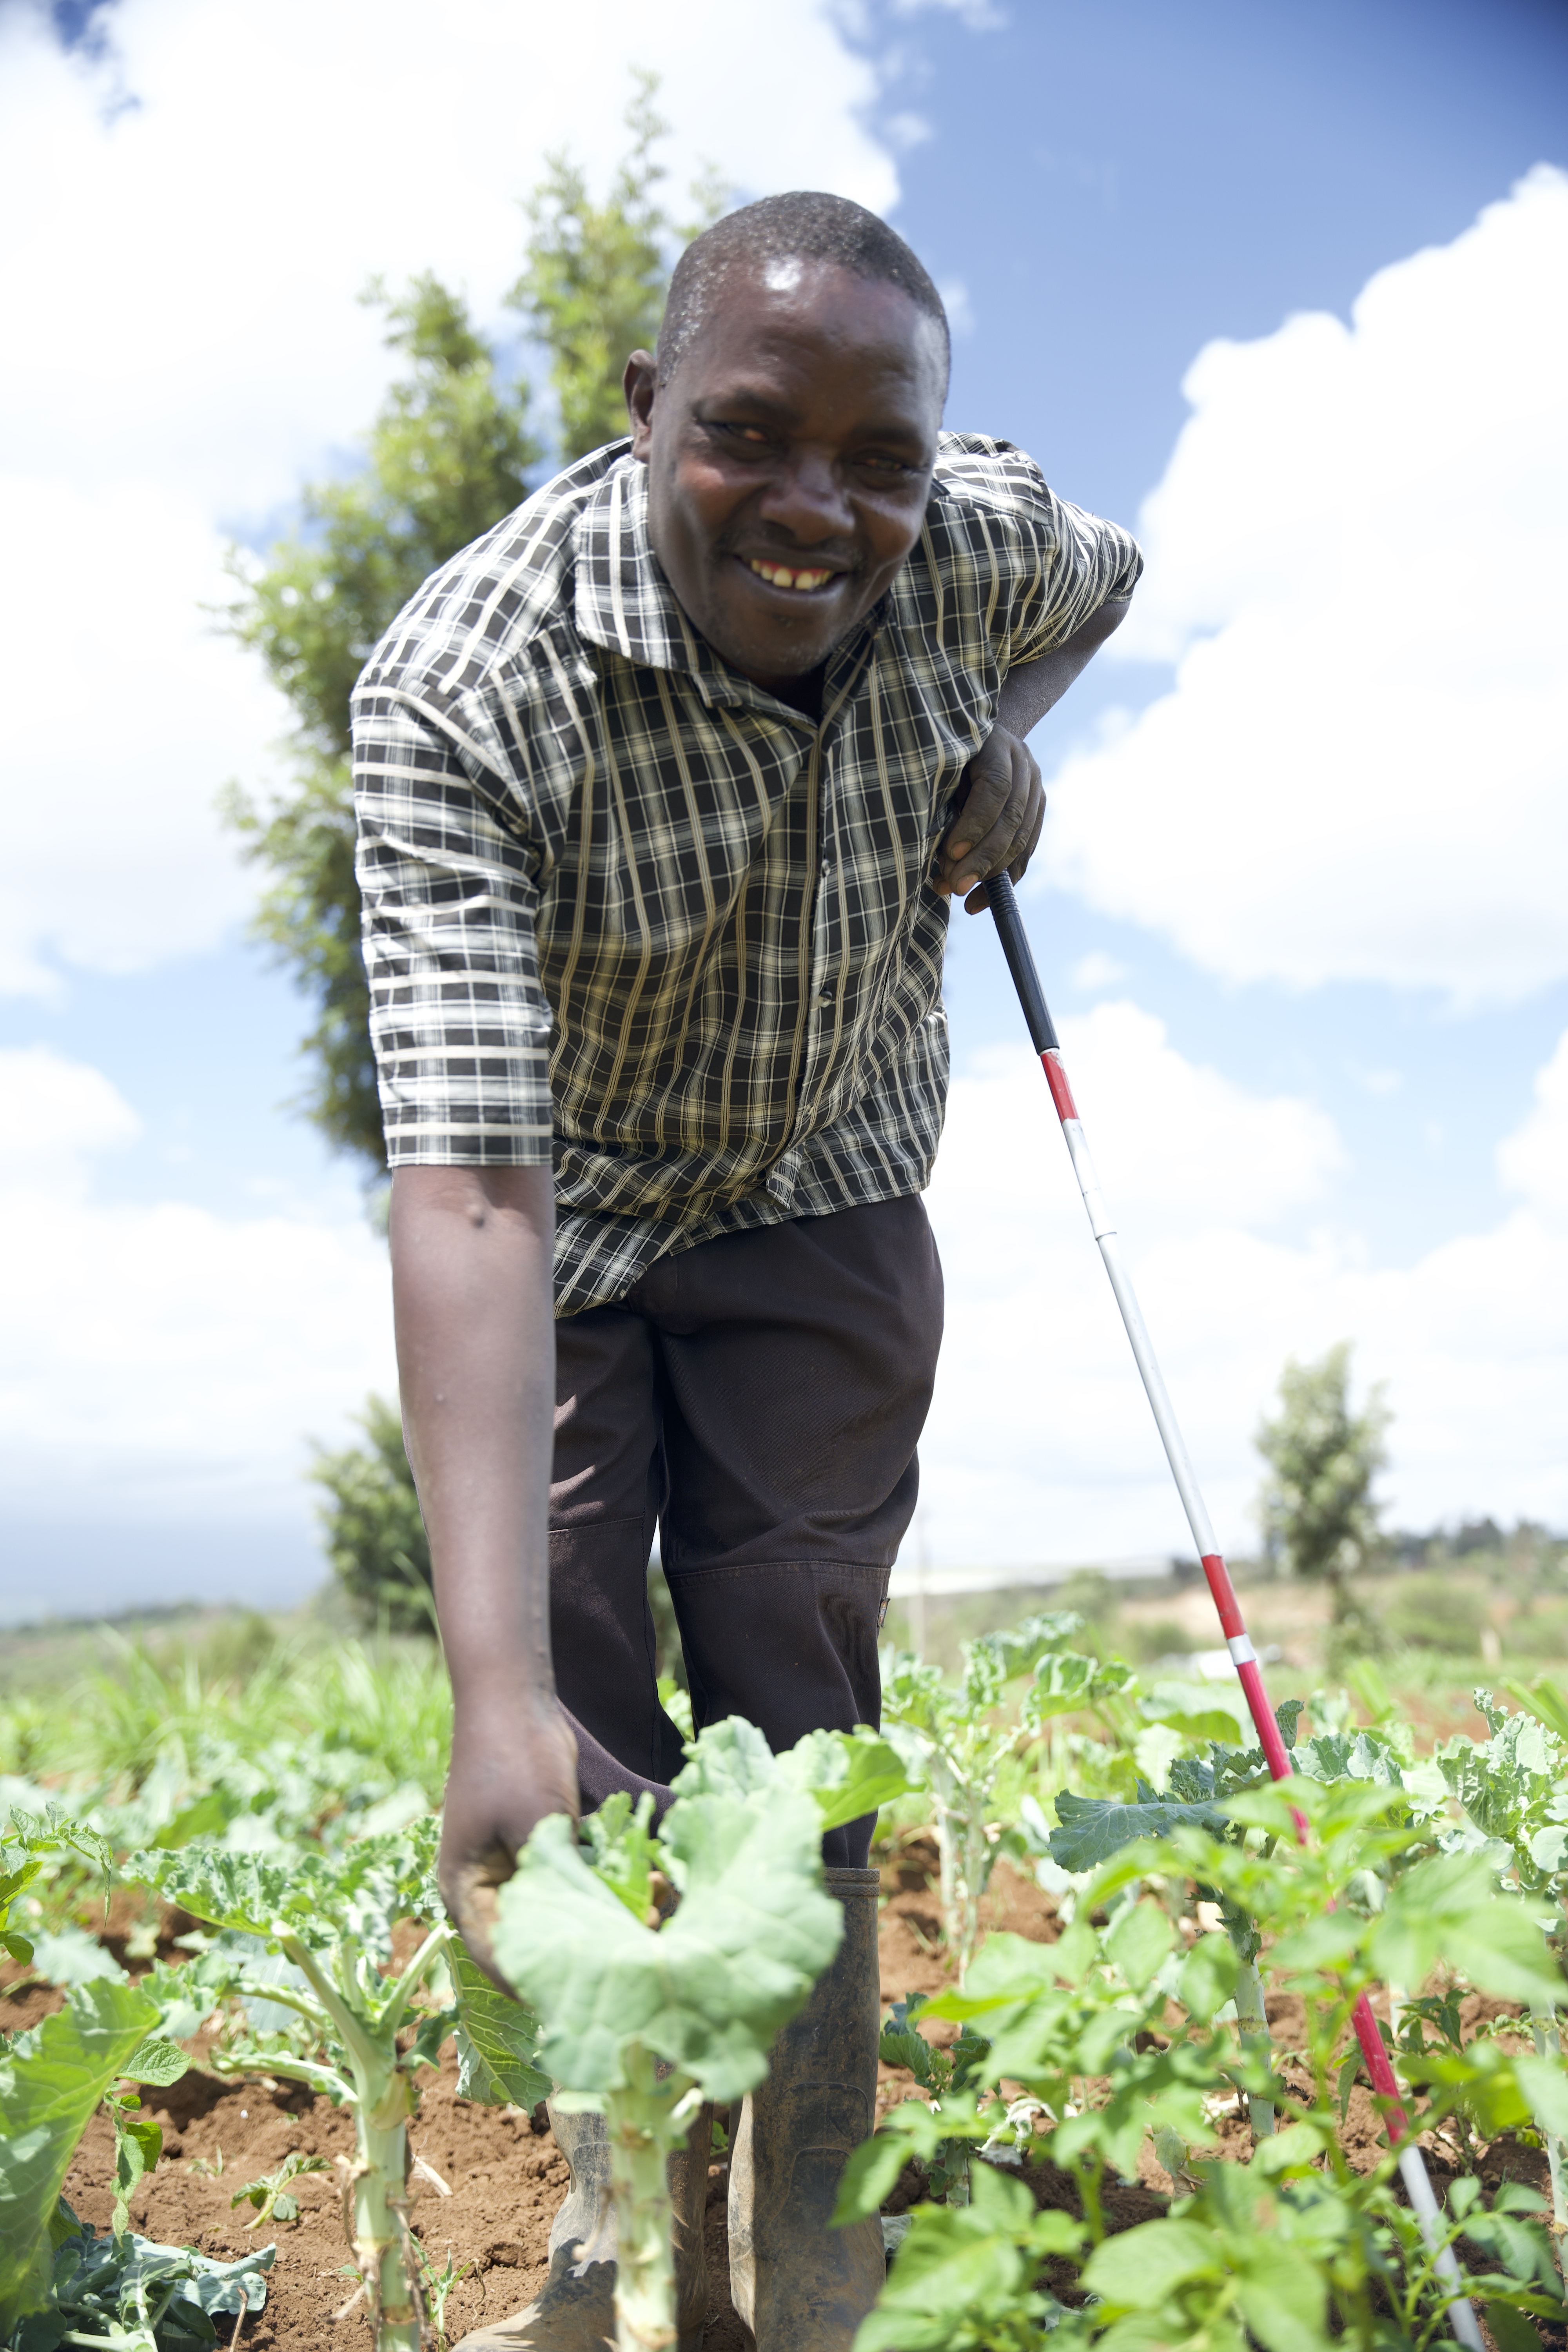 Elijah smiles, wearing a checked shirt. He is picking some vegetables from the ground, and holds onto a cane.